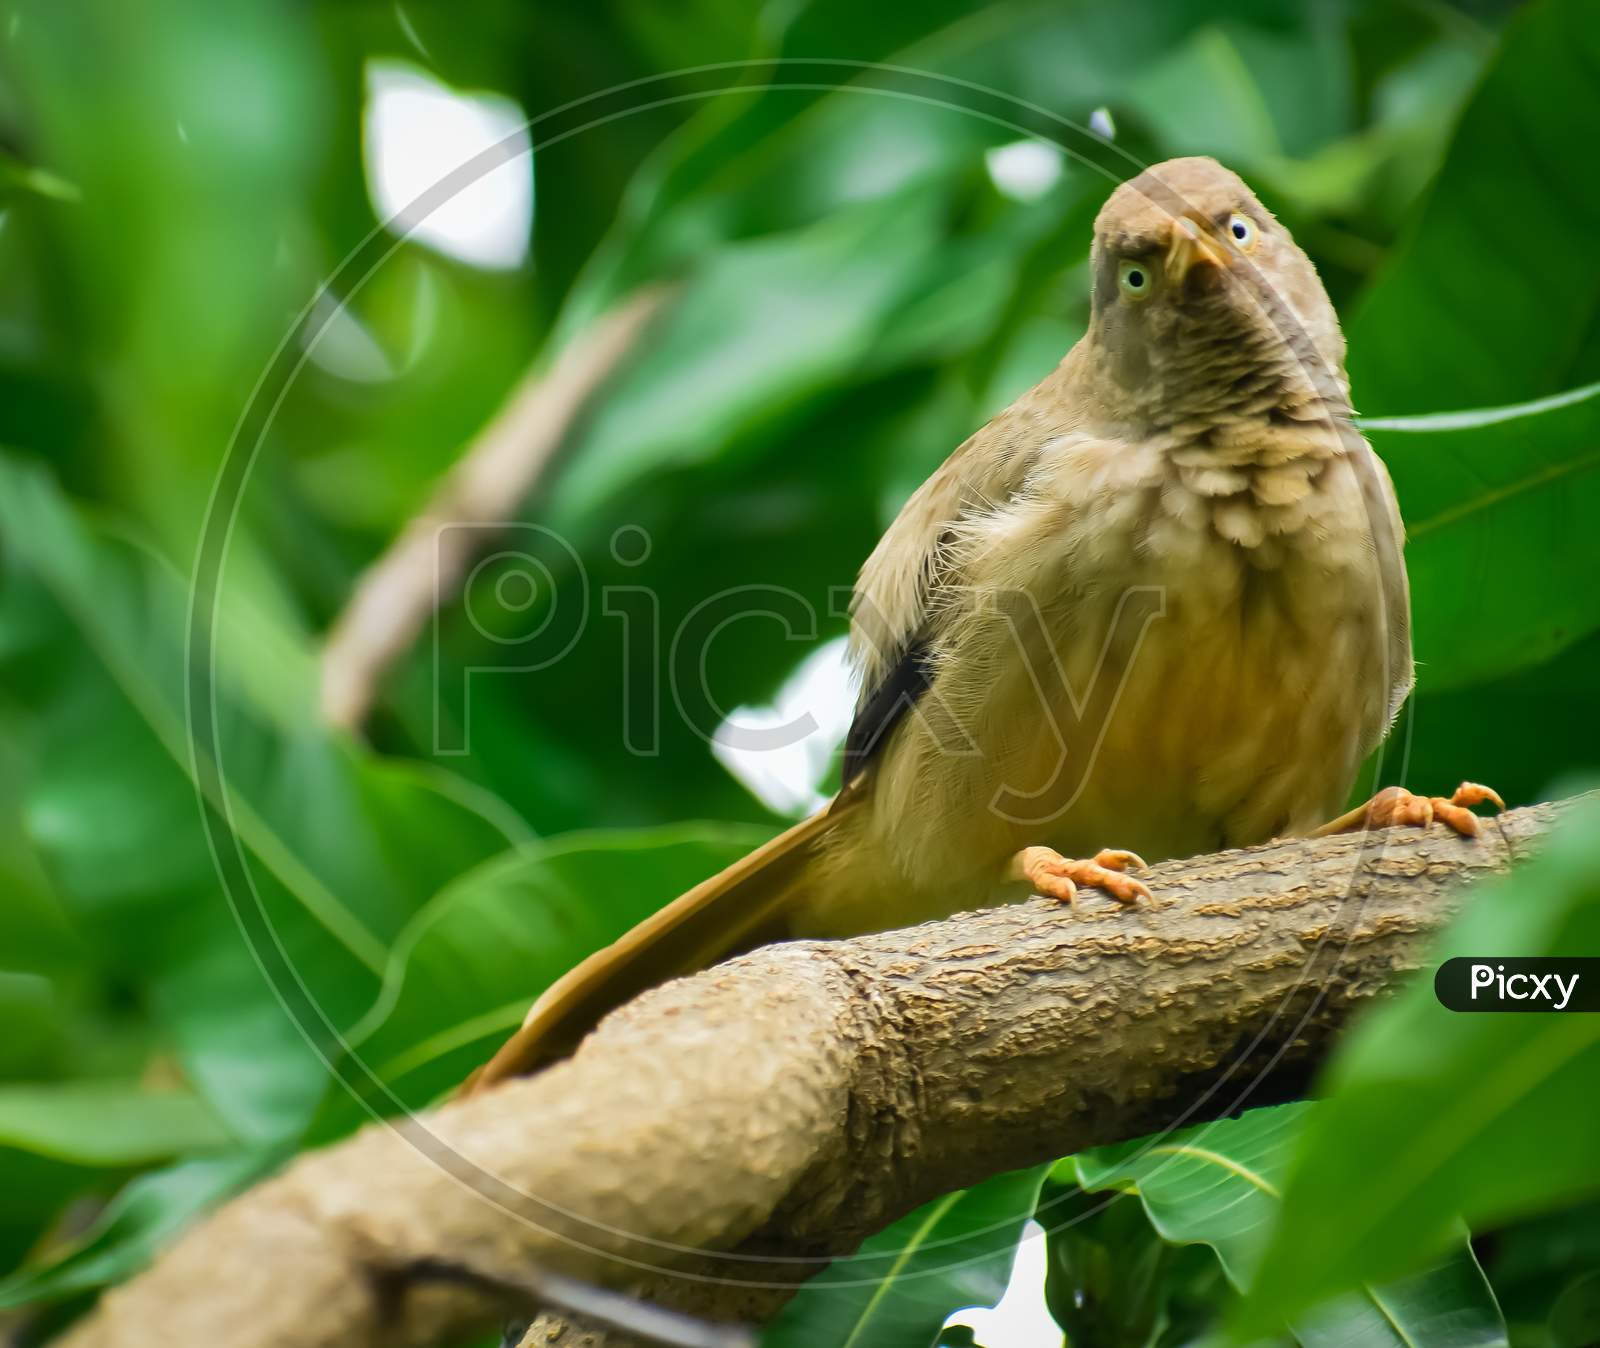 Jungle babbler reaction to camera on the branch of tree in blurry background.